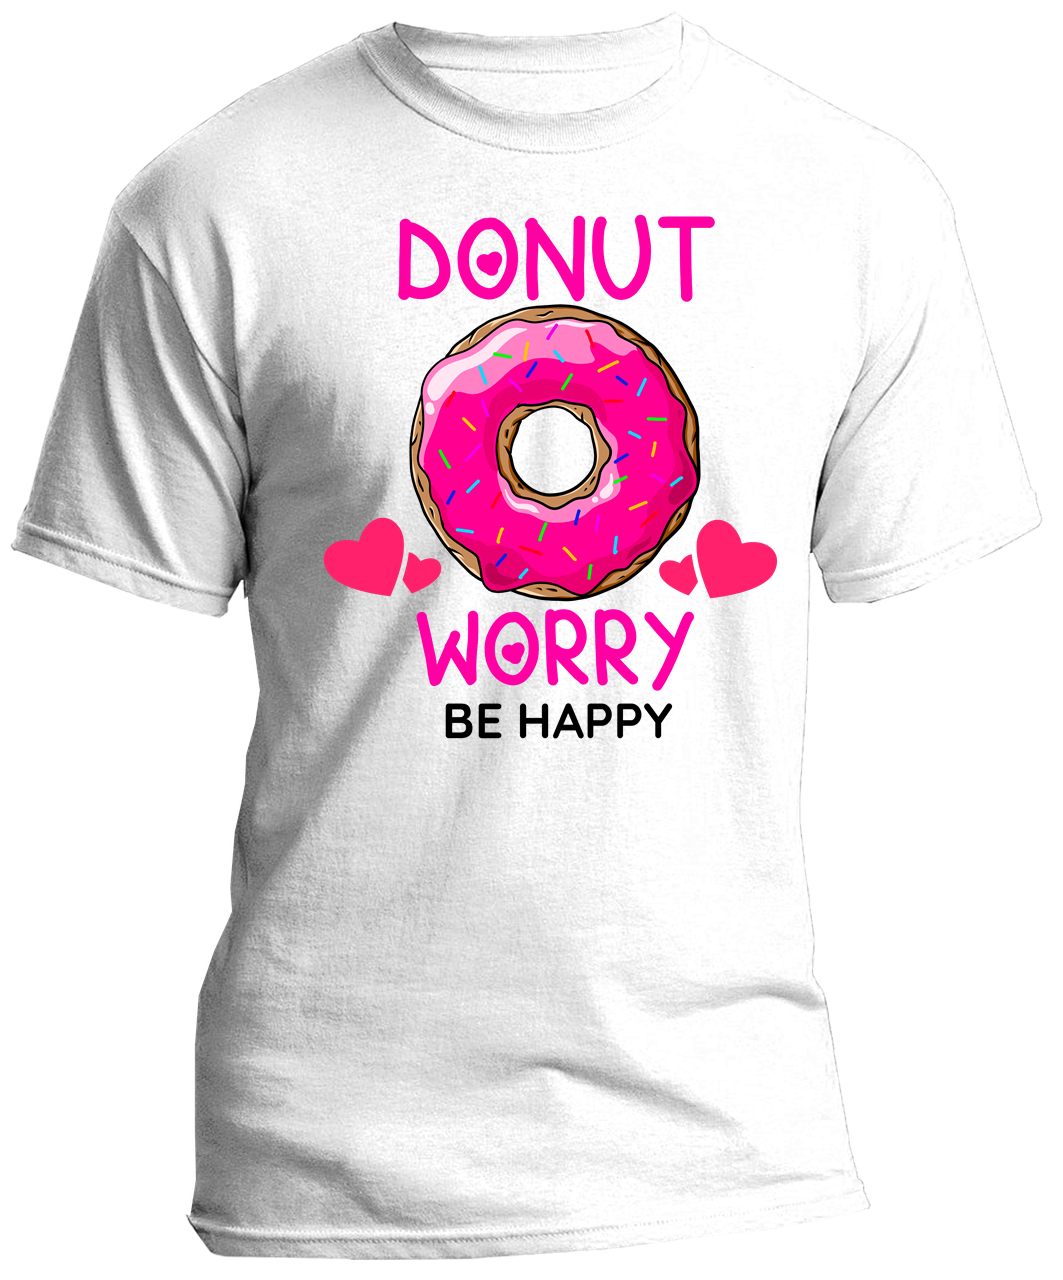 T-Shirt "Donut worry be happy"